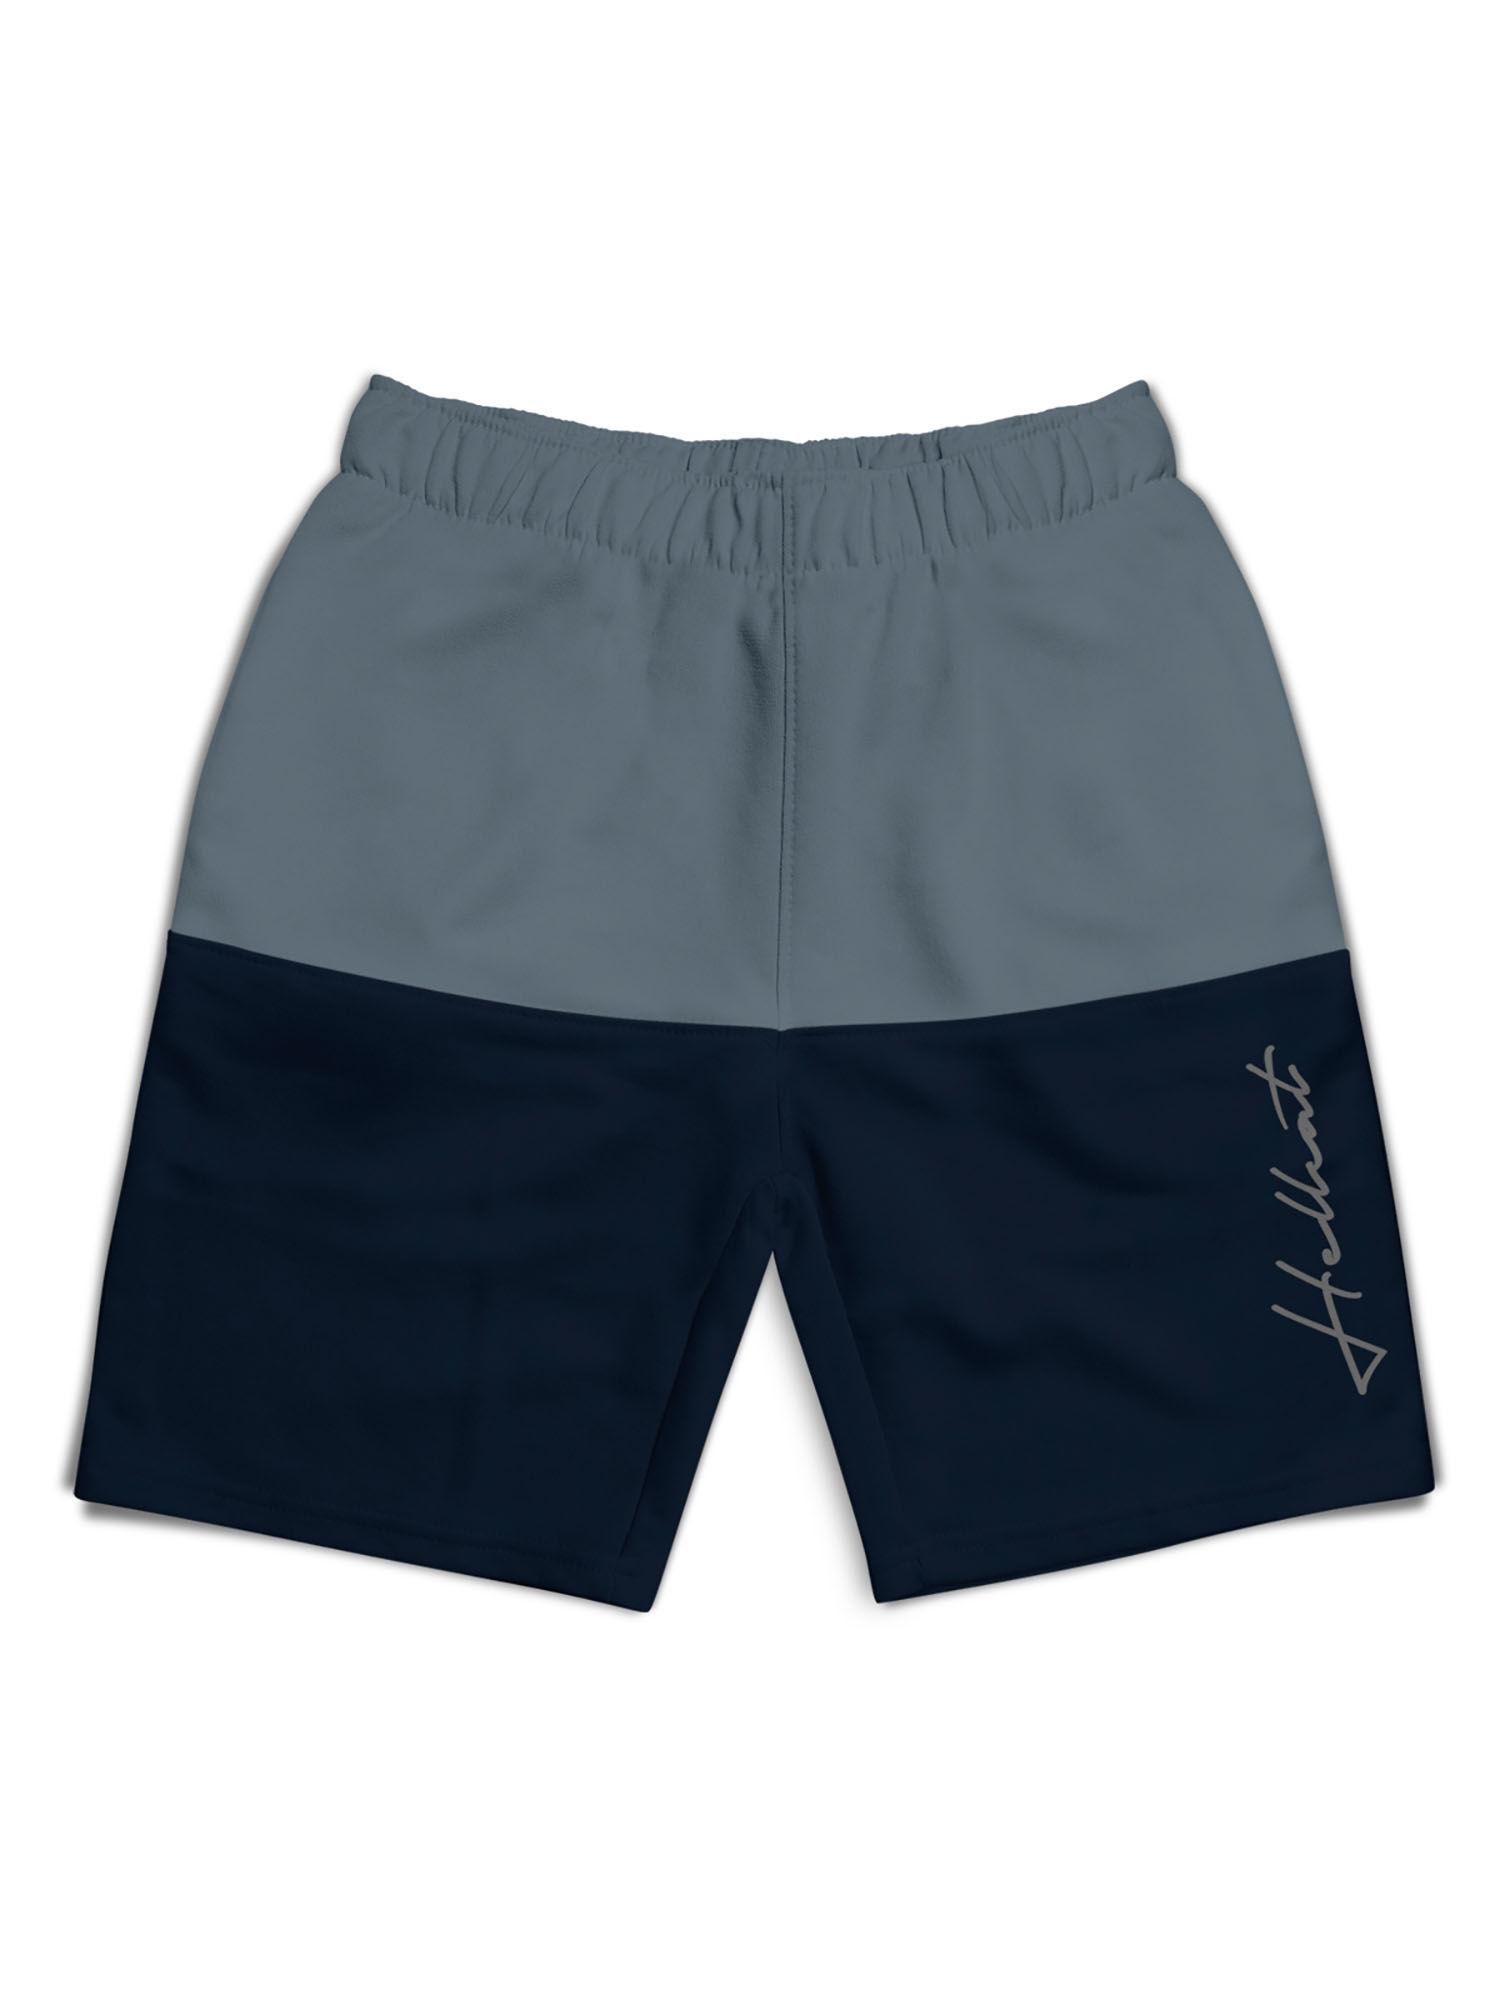 grey-colorblocked-mid-rise-shorts-for-boys